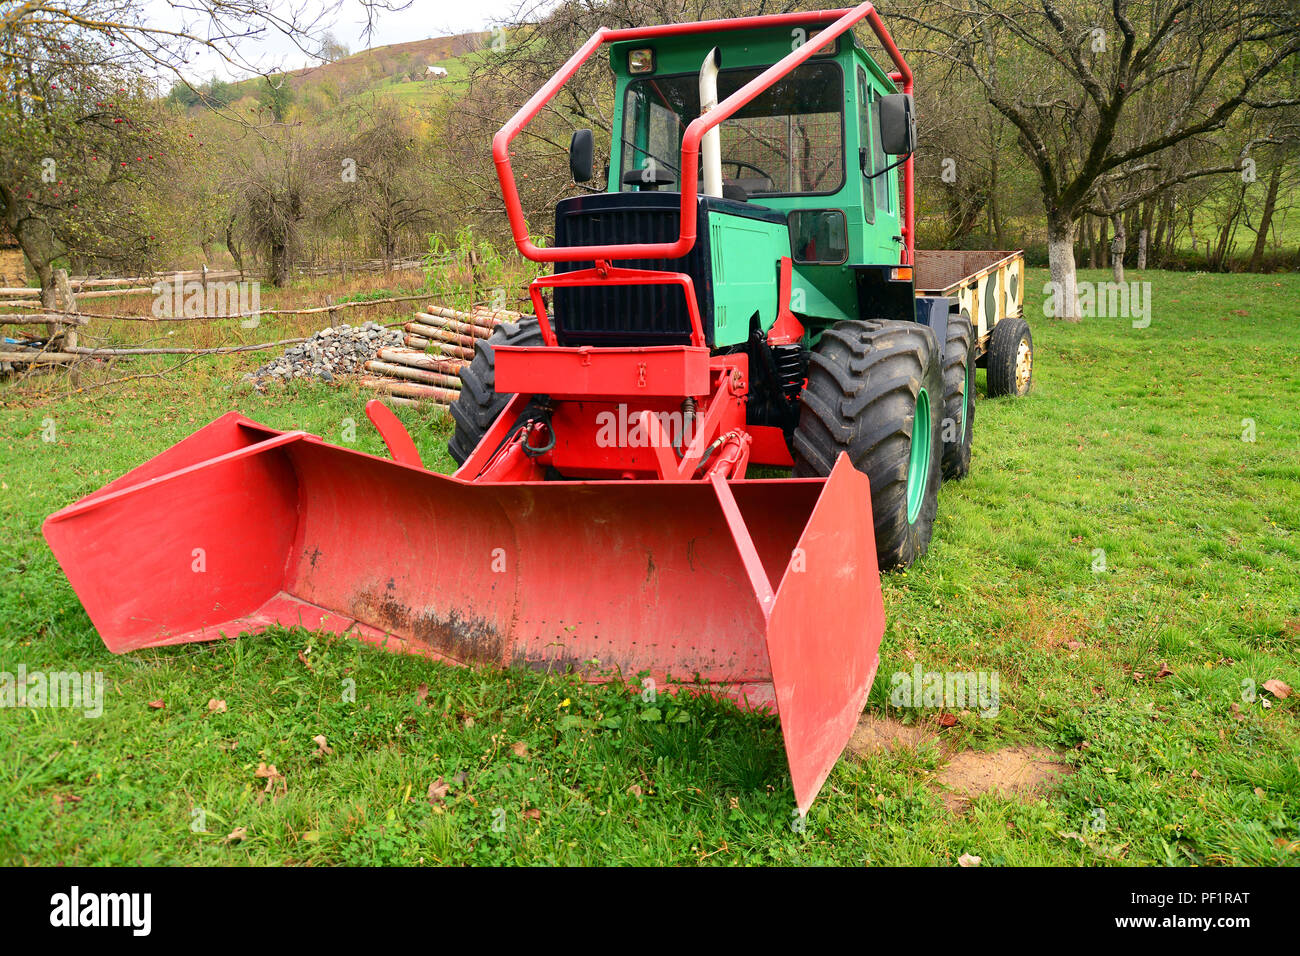 snow removing tractor in the grass Stock Photo